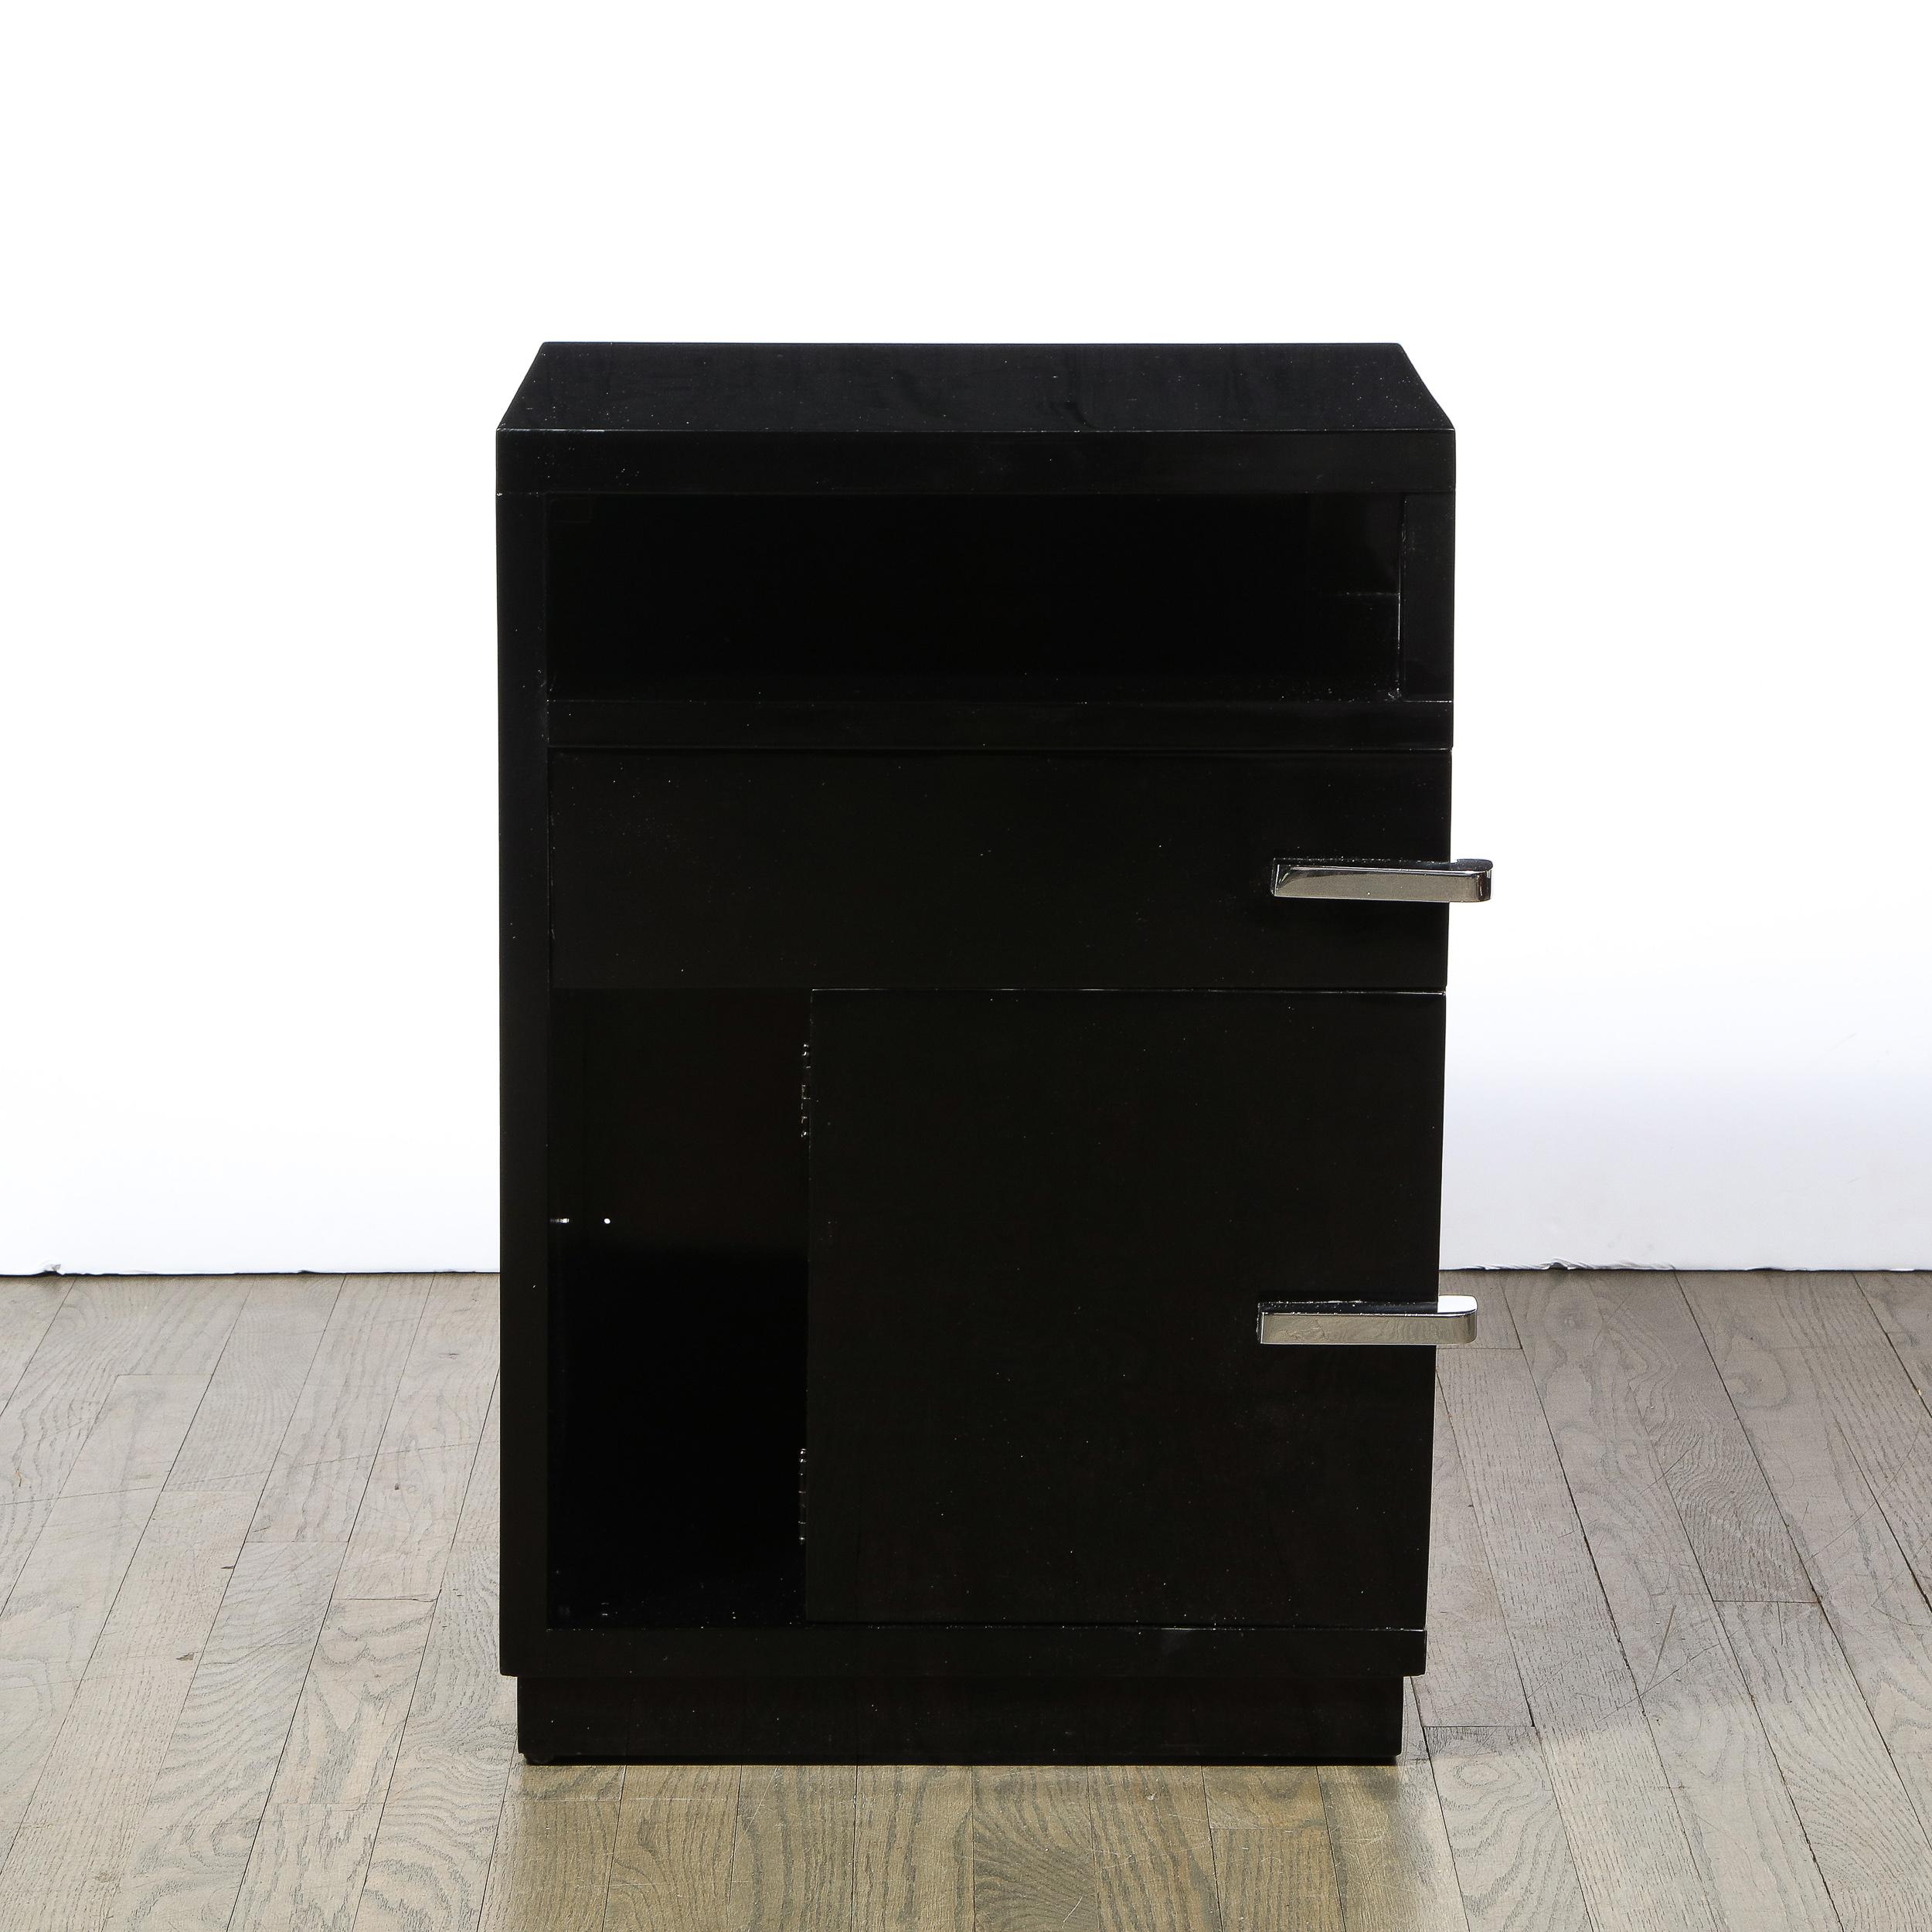 This Art Deco, Machine Age, smoothly finished black lacquer nightstand was created in the United States circa 1935. Volumetric rectangular body with open-cornered top shelf followed below by a pull-out drawer and hinged door provides ample storage